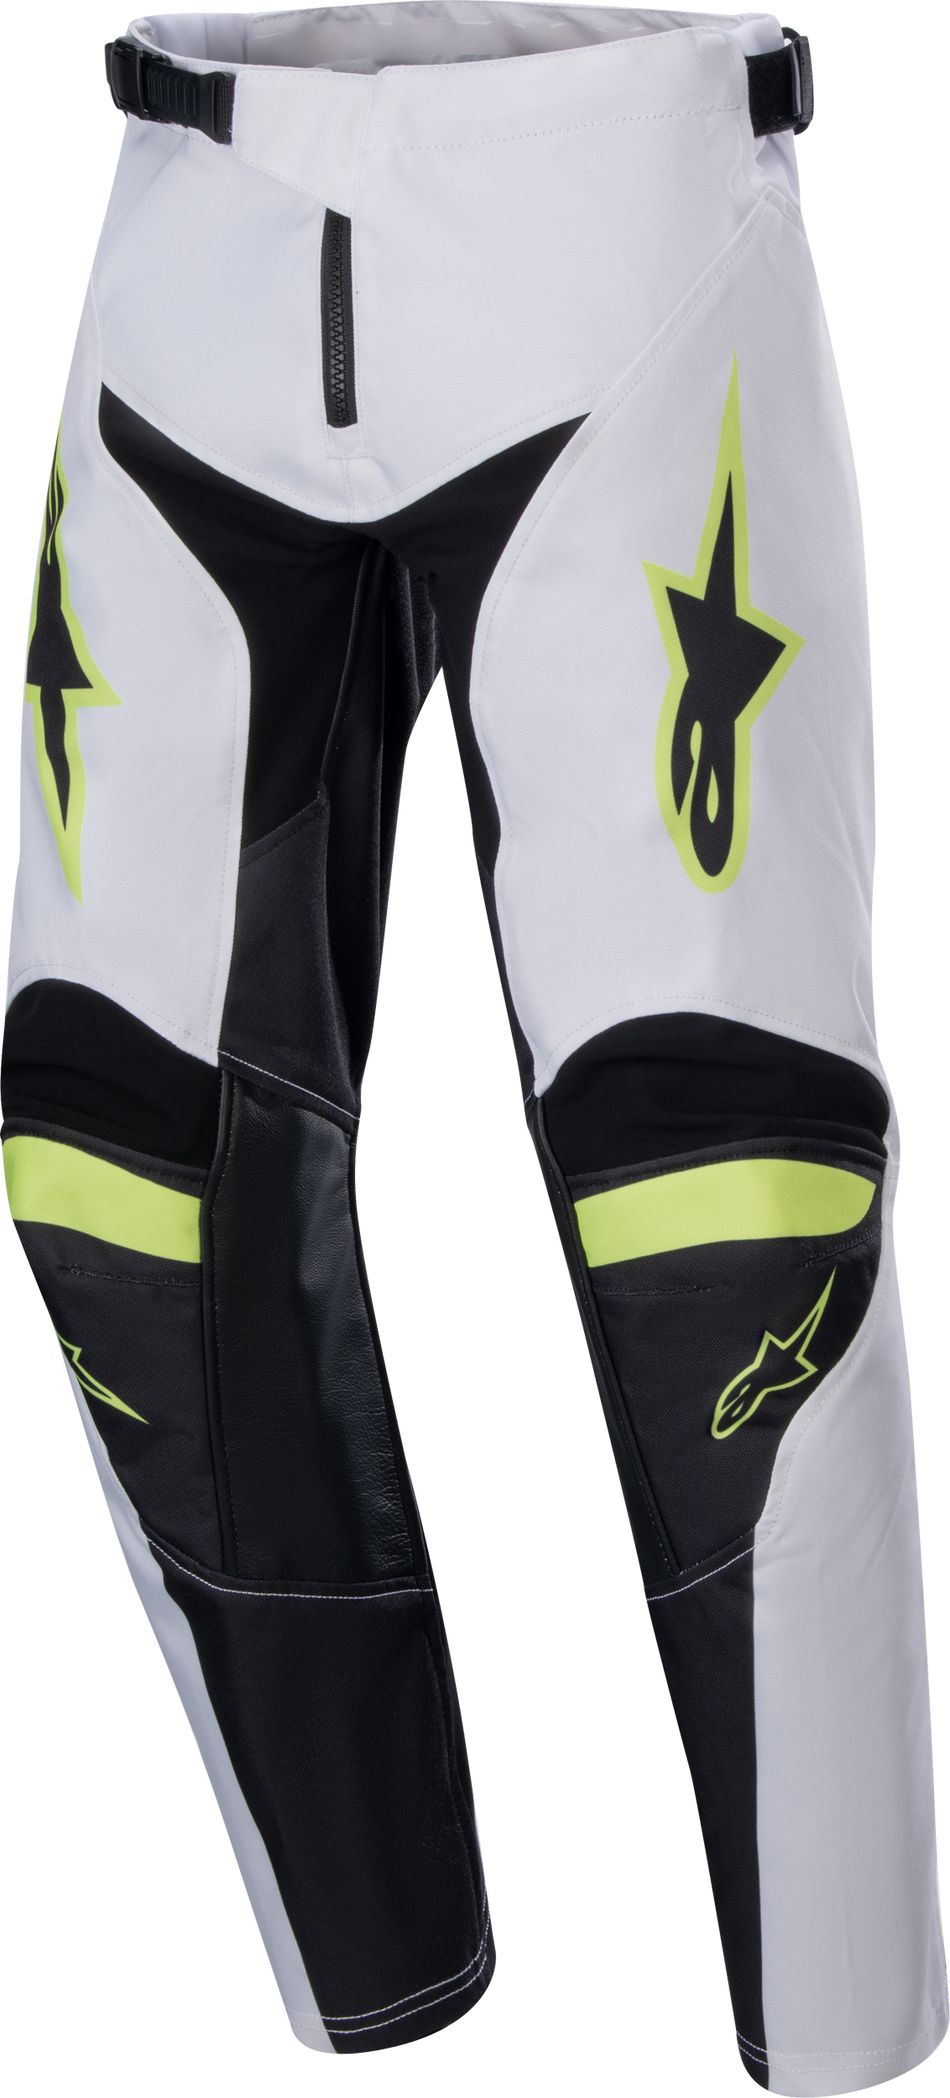 ALPINESTARS Youth Racer Lucent Pants Wht/Neon Rd/Ylw Fluo Sz 24 3743724-2029-24